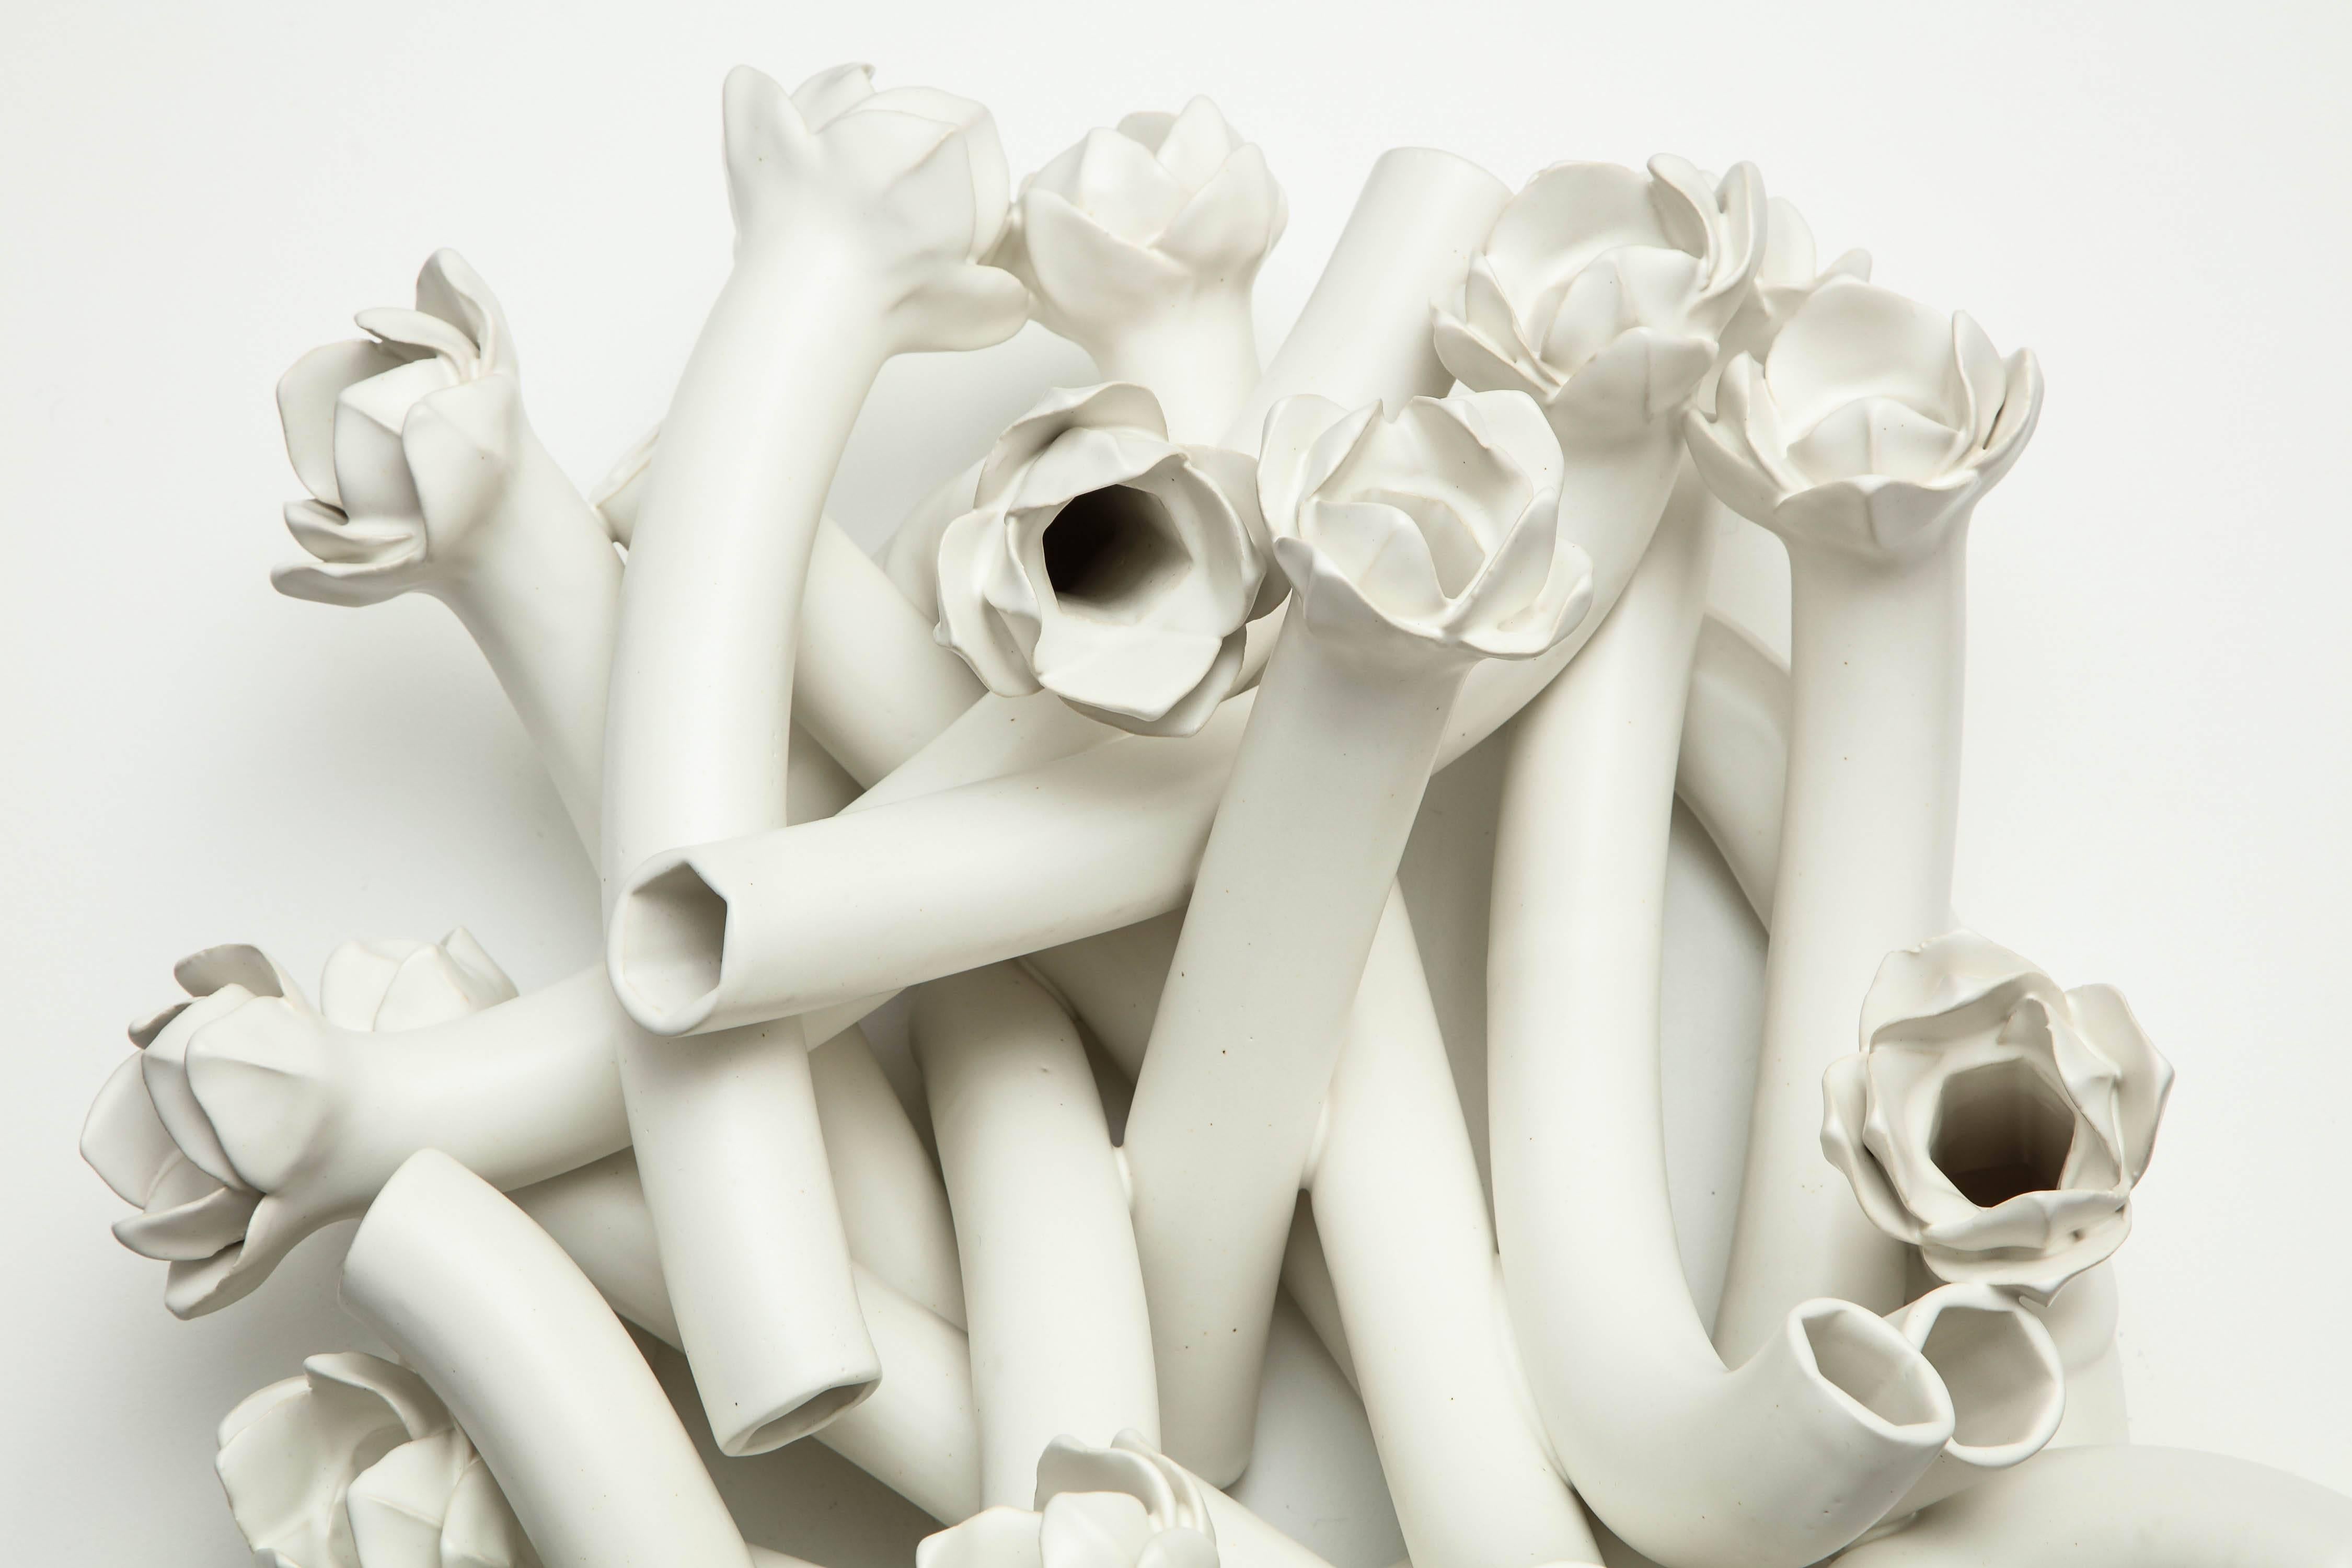 Fired Unique Porcelain Sculpture from the Flora Series by Anat Shiftan, 2017